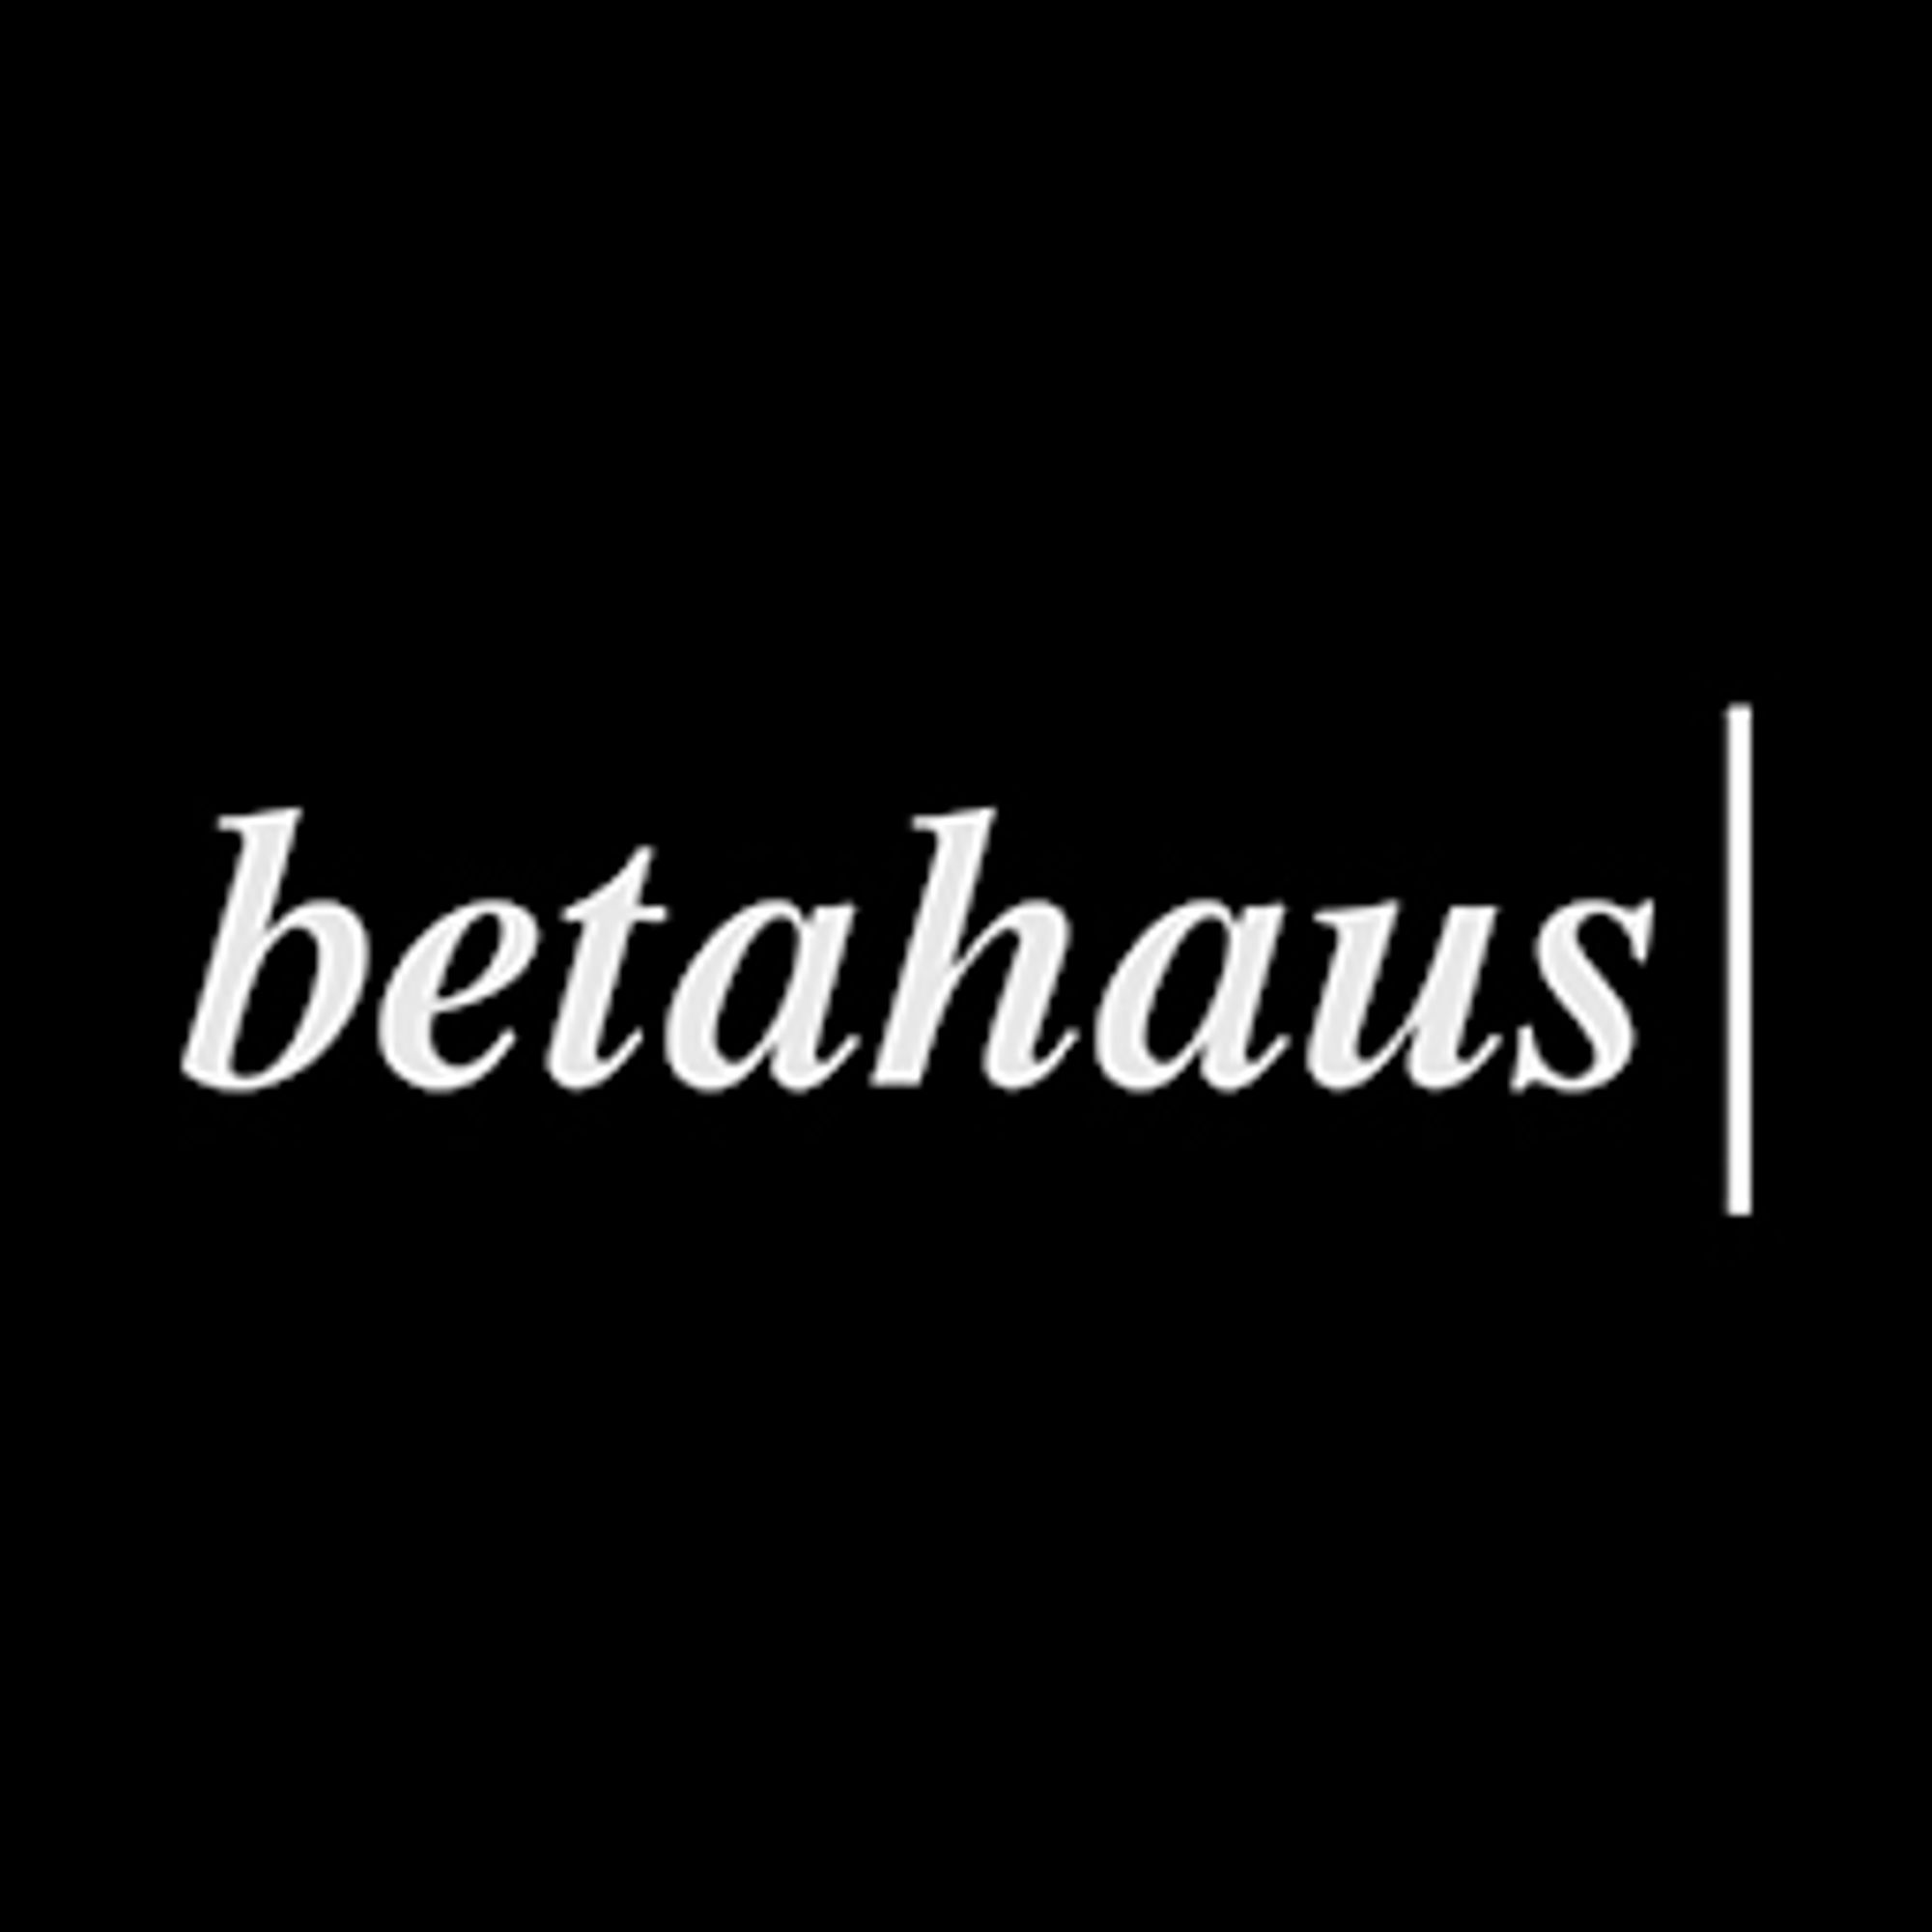 betahaus Berlin | Coworking, Offices, Event Spaces 🚀